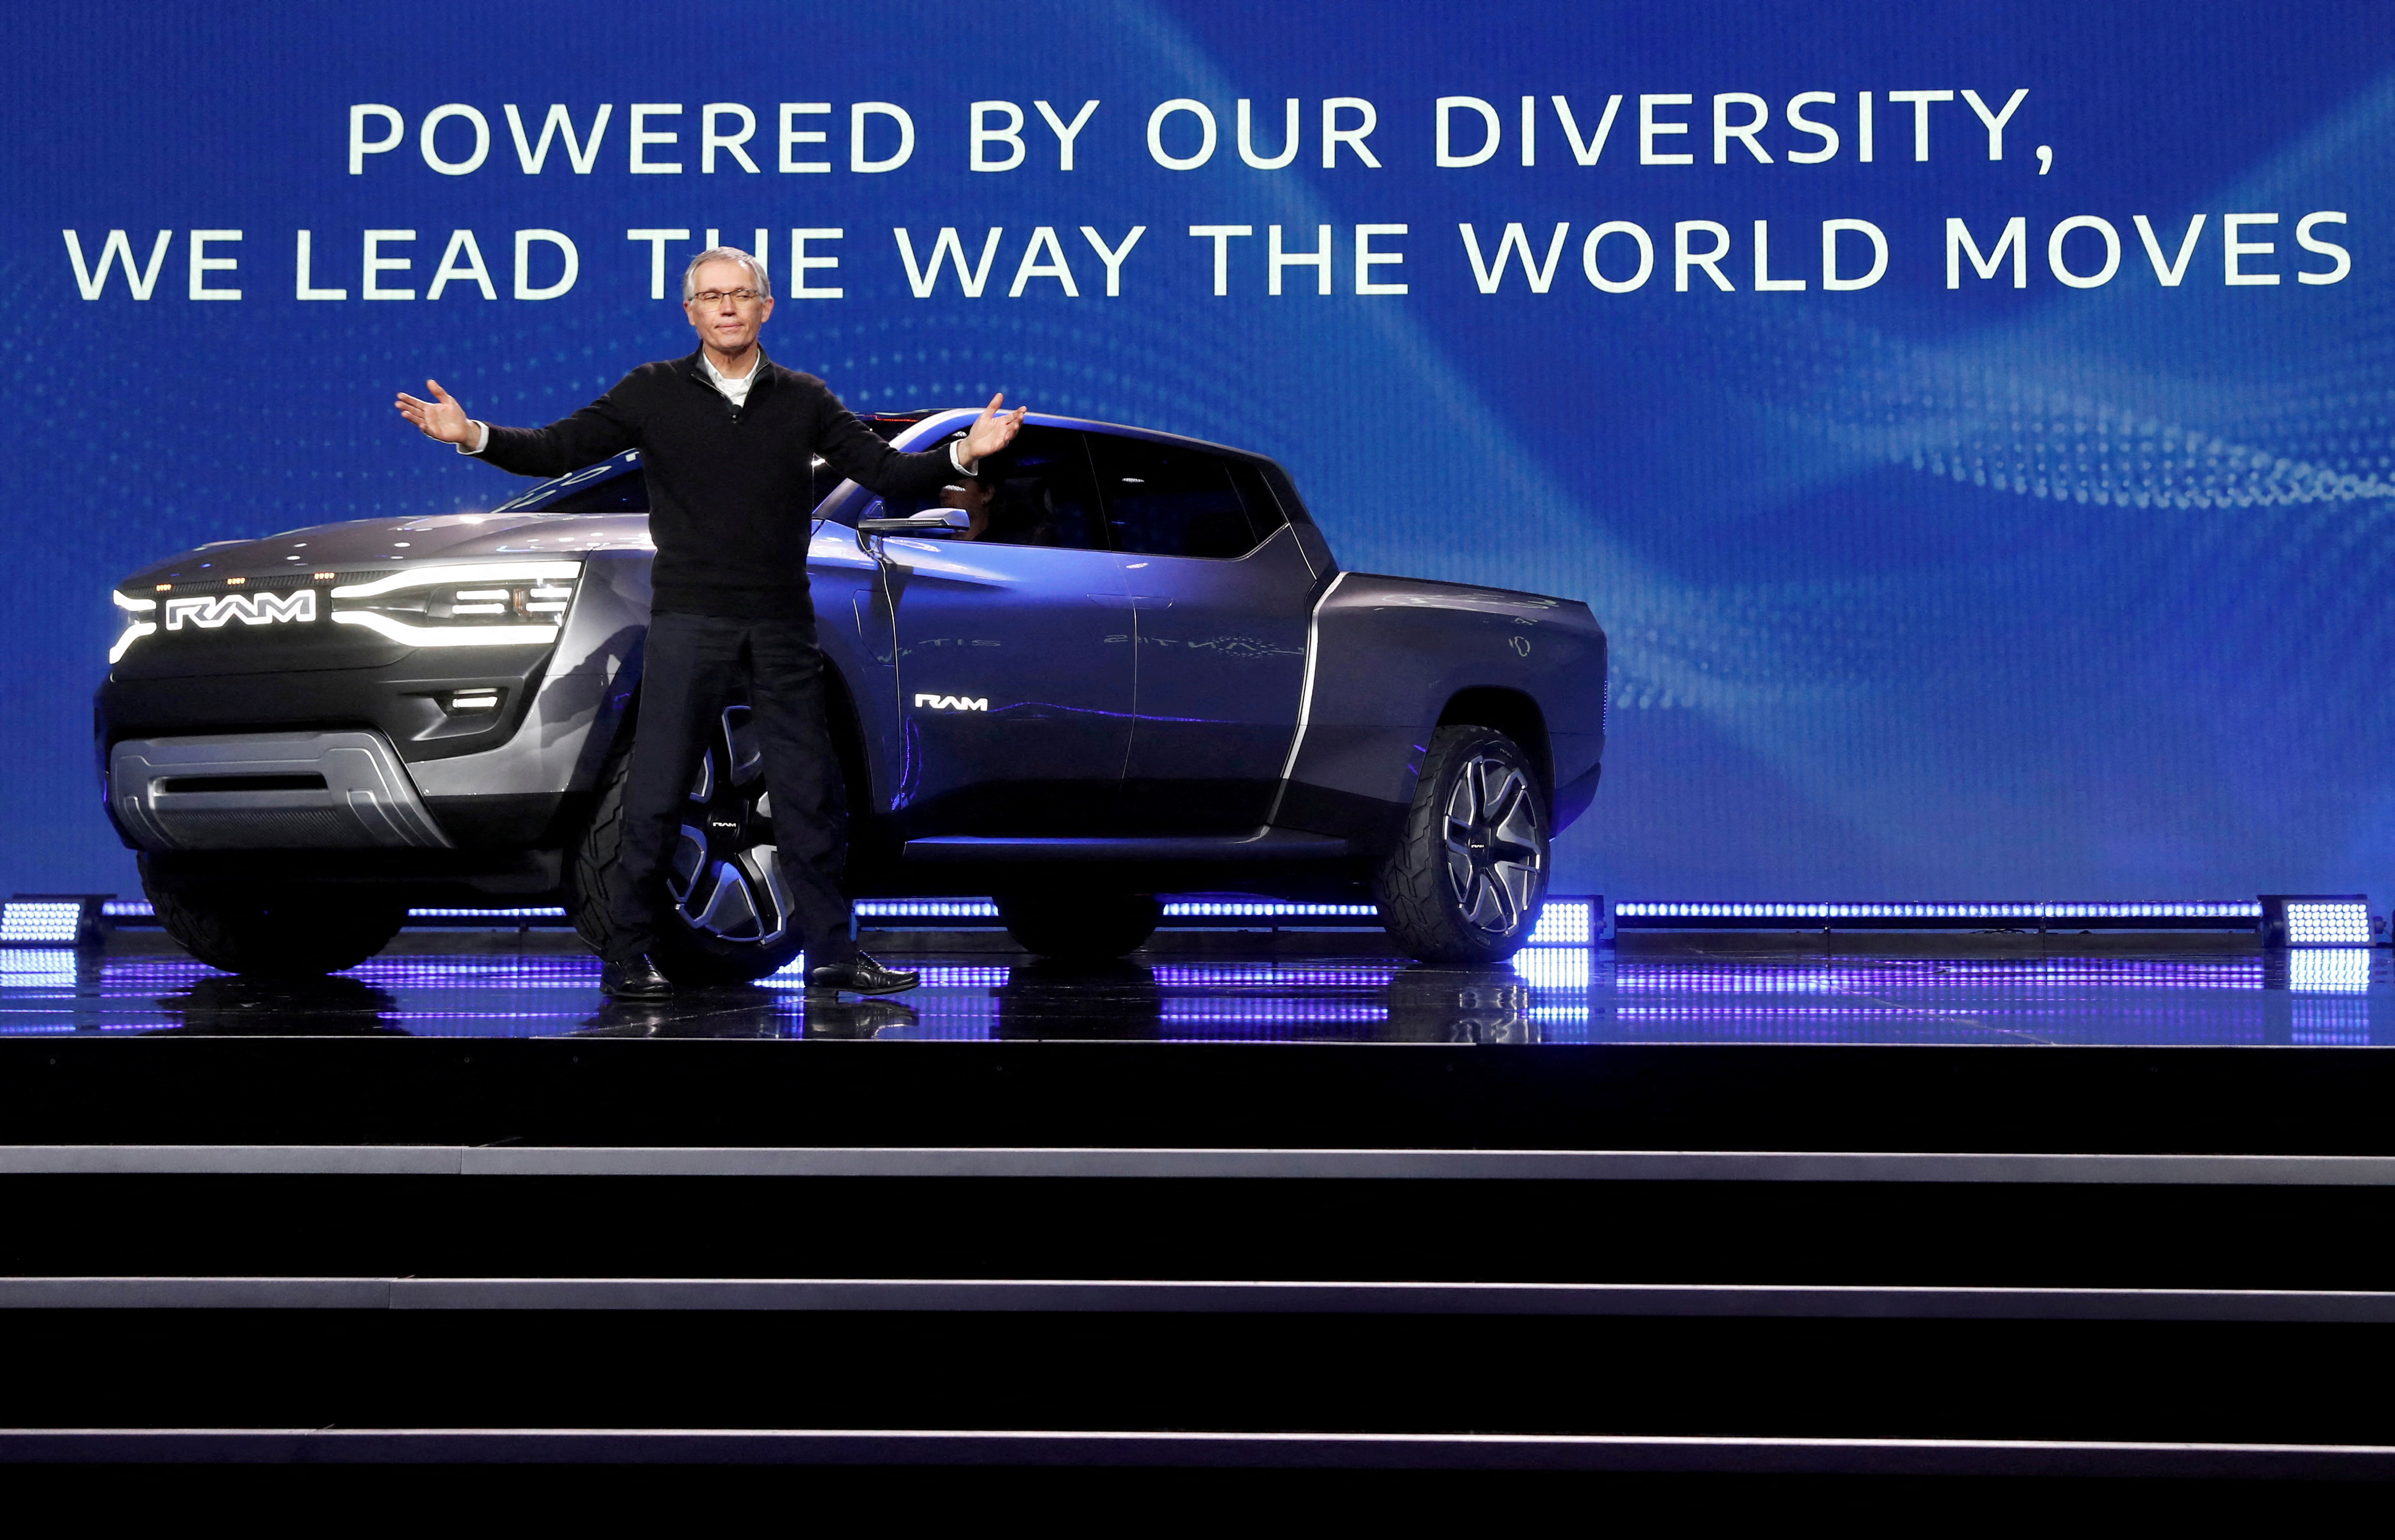 Stellantis CEO Carlos Tavares poses in front of the Ram 1500 Revolution electric concept pickup truck during a Stellantis keynote address at CES 2023, an annual consumer electronics trade show in Las Vegas